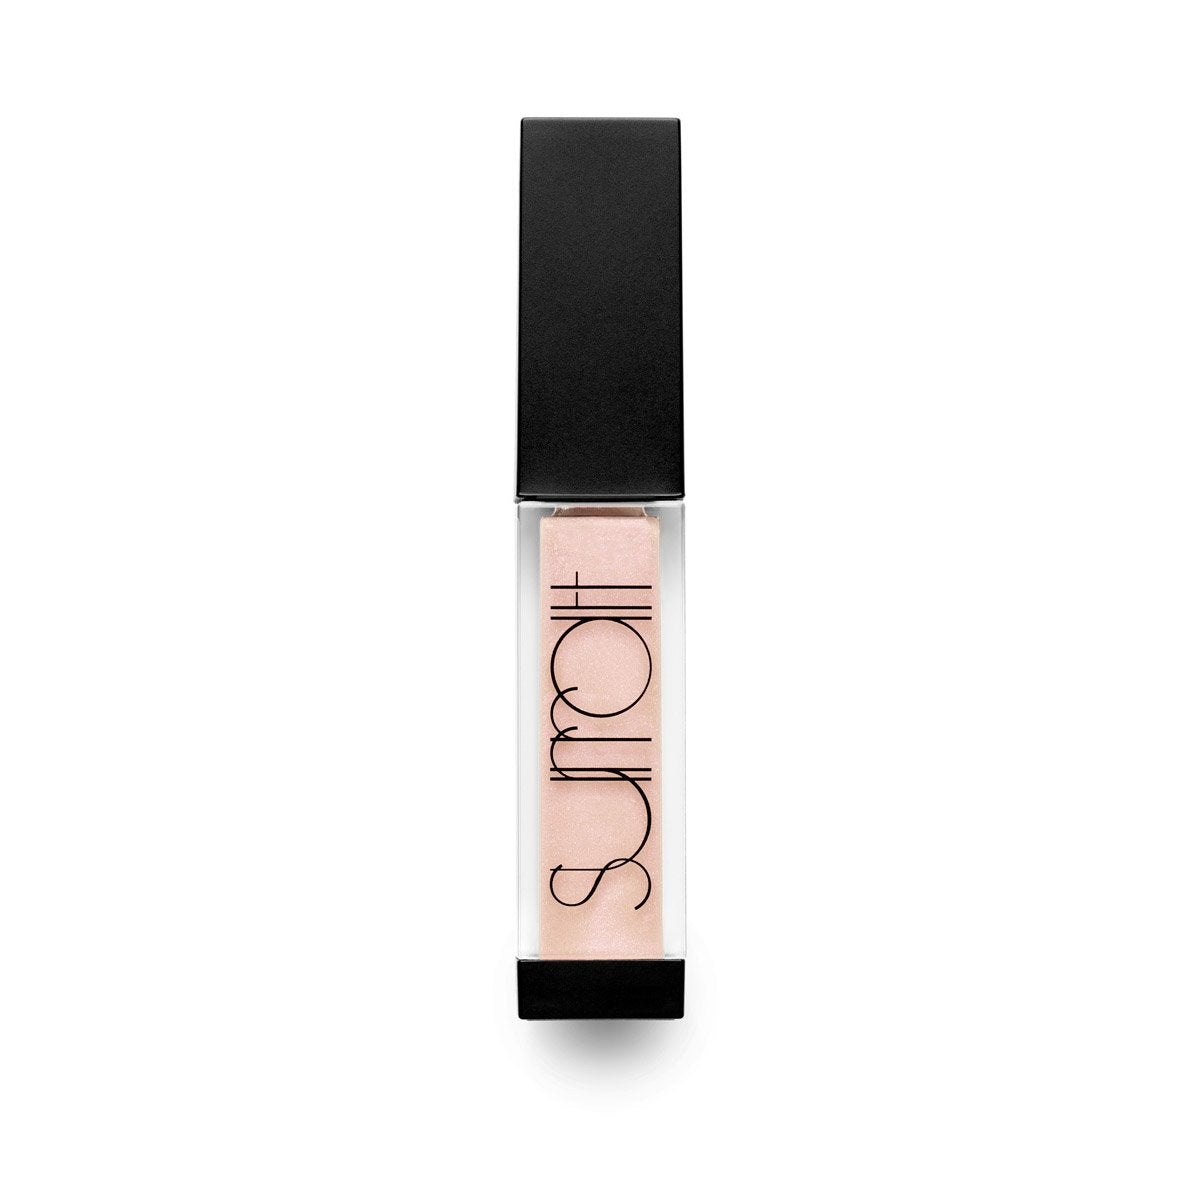 OH LA LA - SHEER PEACH WITH PINK AND GOLD SHIMMER - high shine lip gloss in sheer peach shade with pink and gold glitter